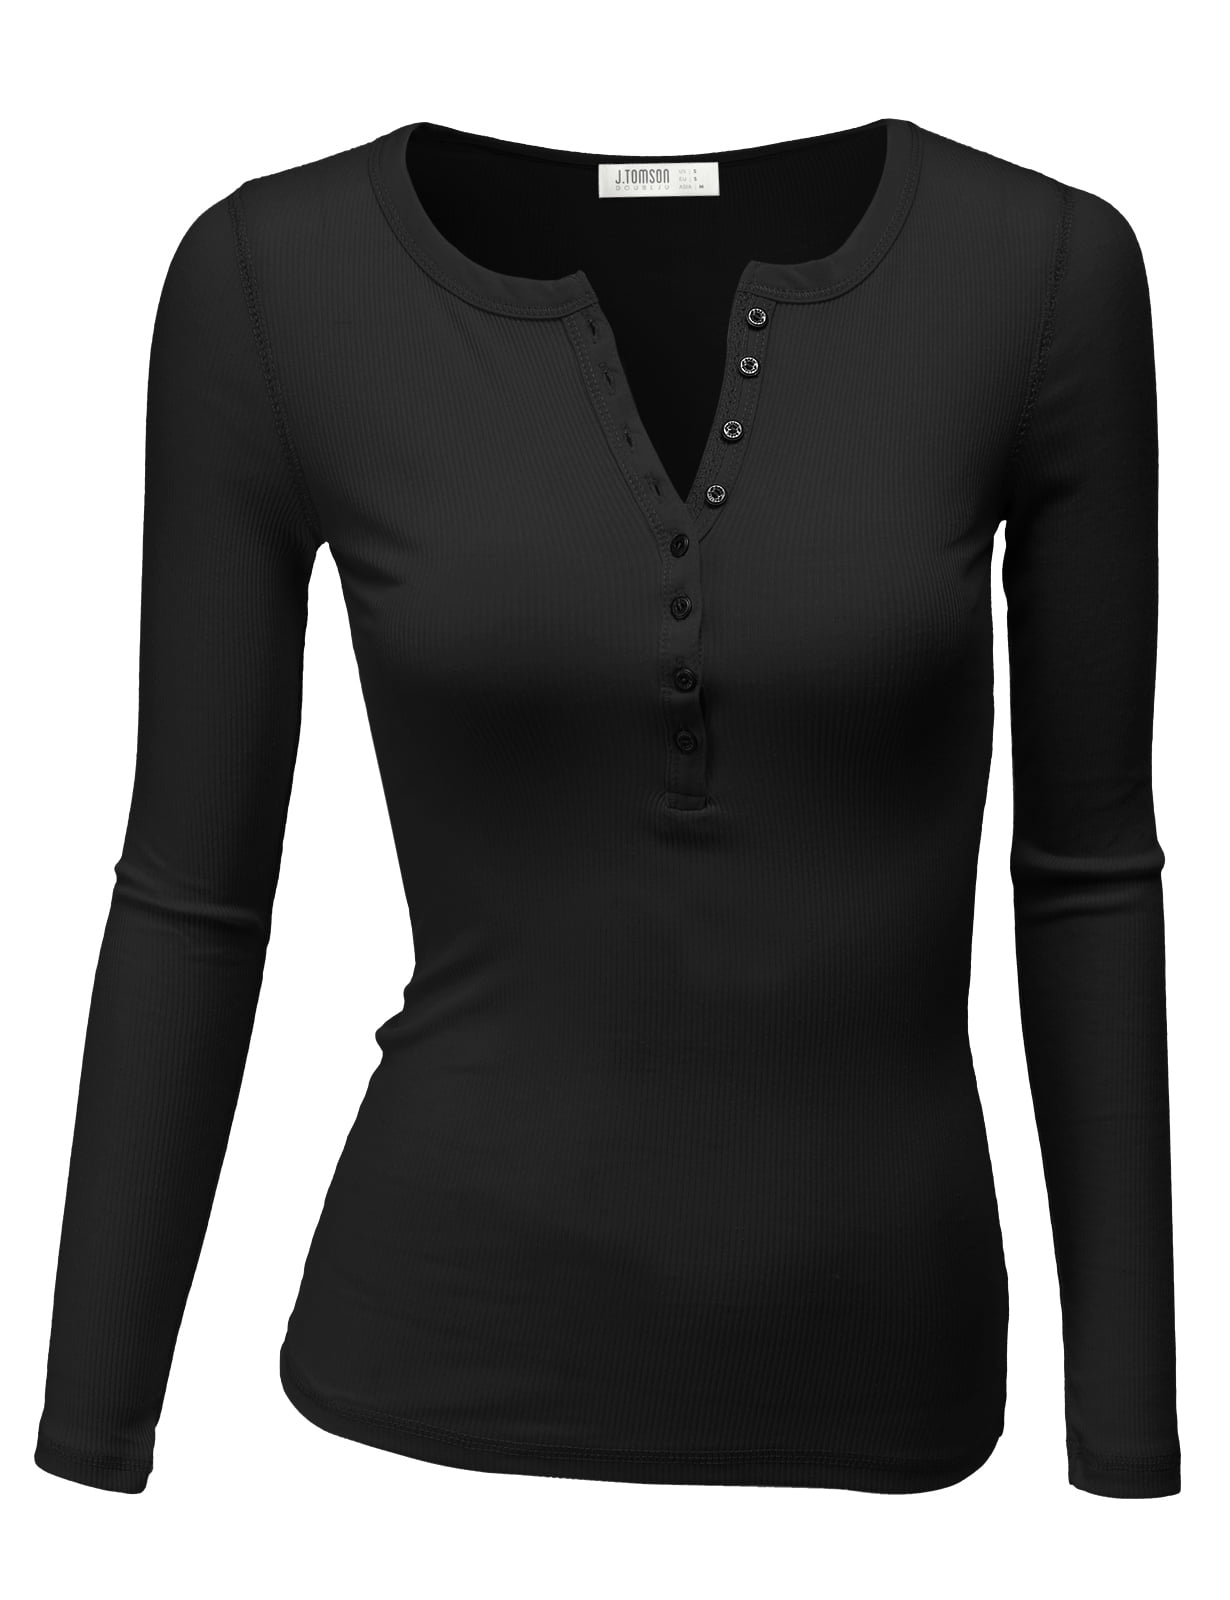 Sleeve Size L Neck Henley CHARCOAL Women\'s Top T-Shirts Plus Thermal Women Round Long